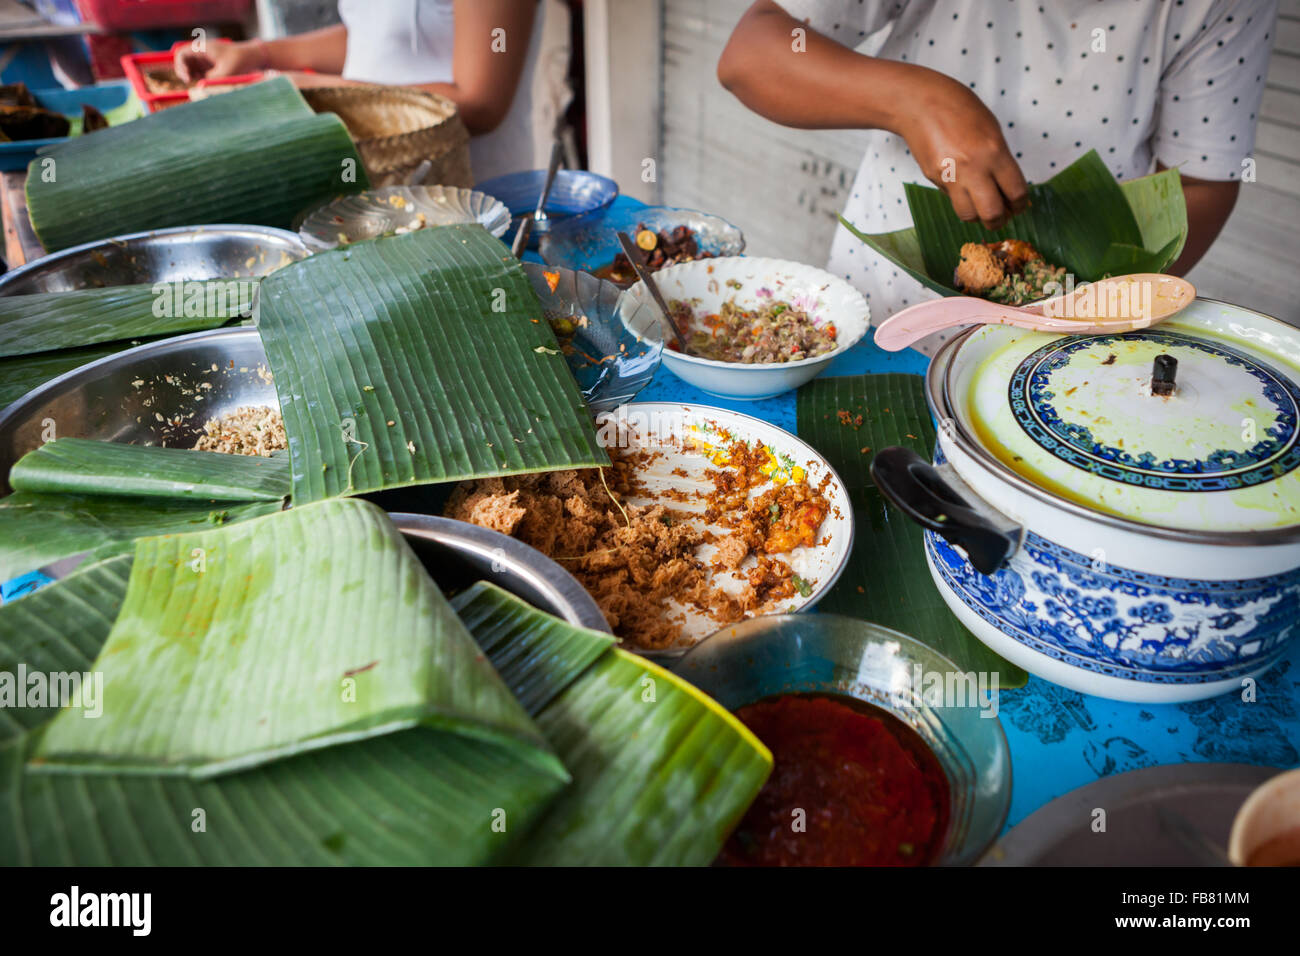 A woman serving customers at a street-side food vendor offering traditionally cooked food in Klungkung, Bali, Indonesia. Stock Photo